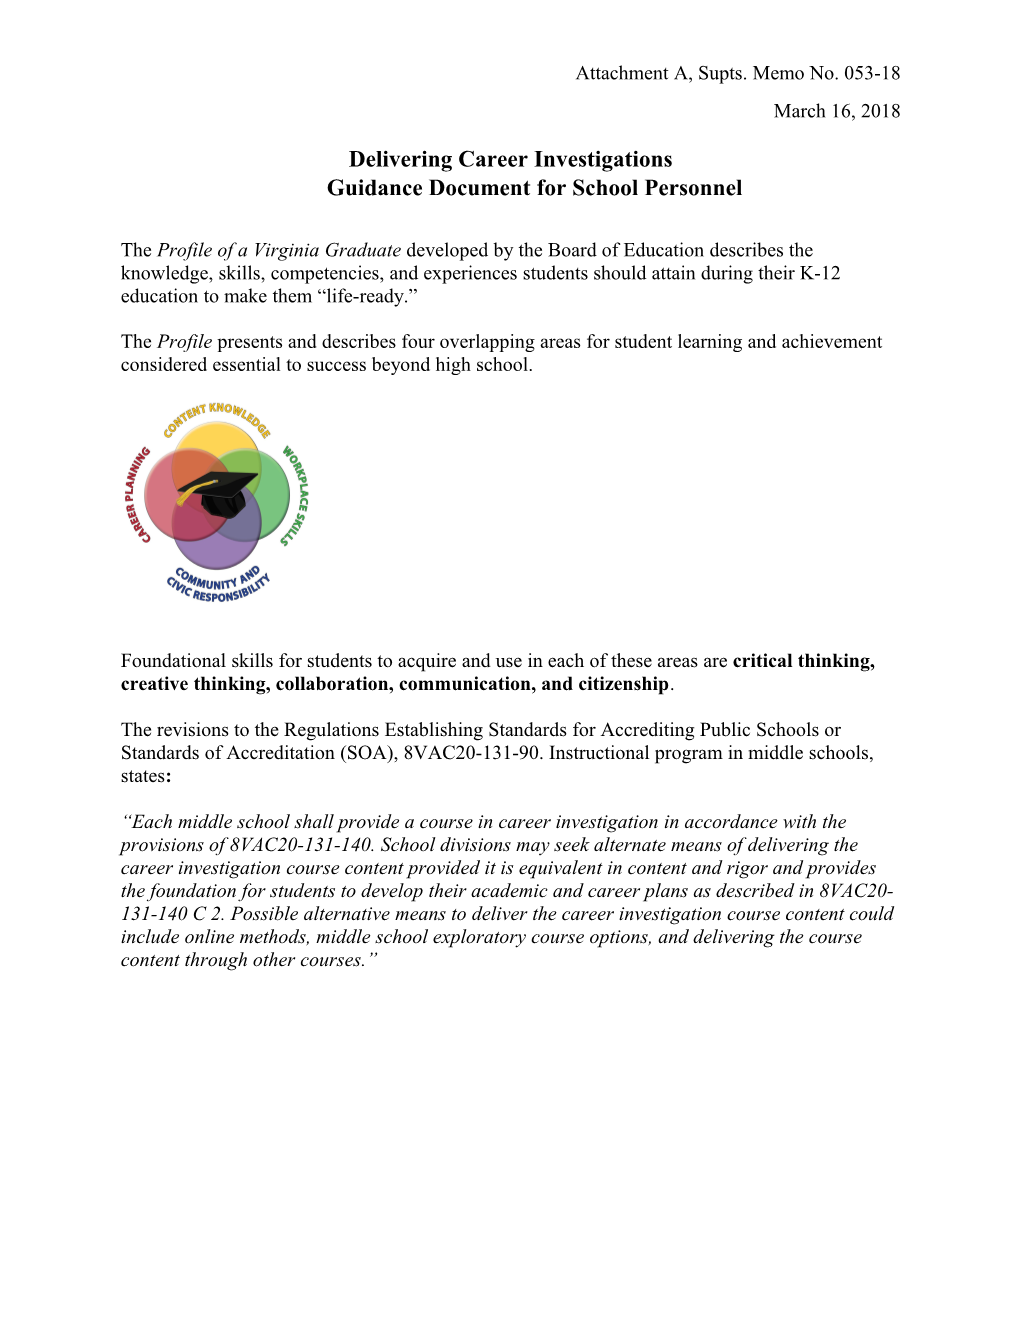 Career Investigatins Guidance Document for School Personnel